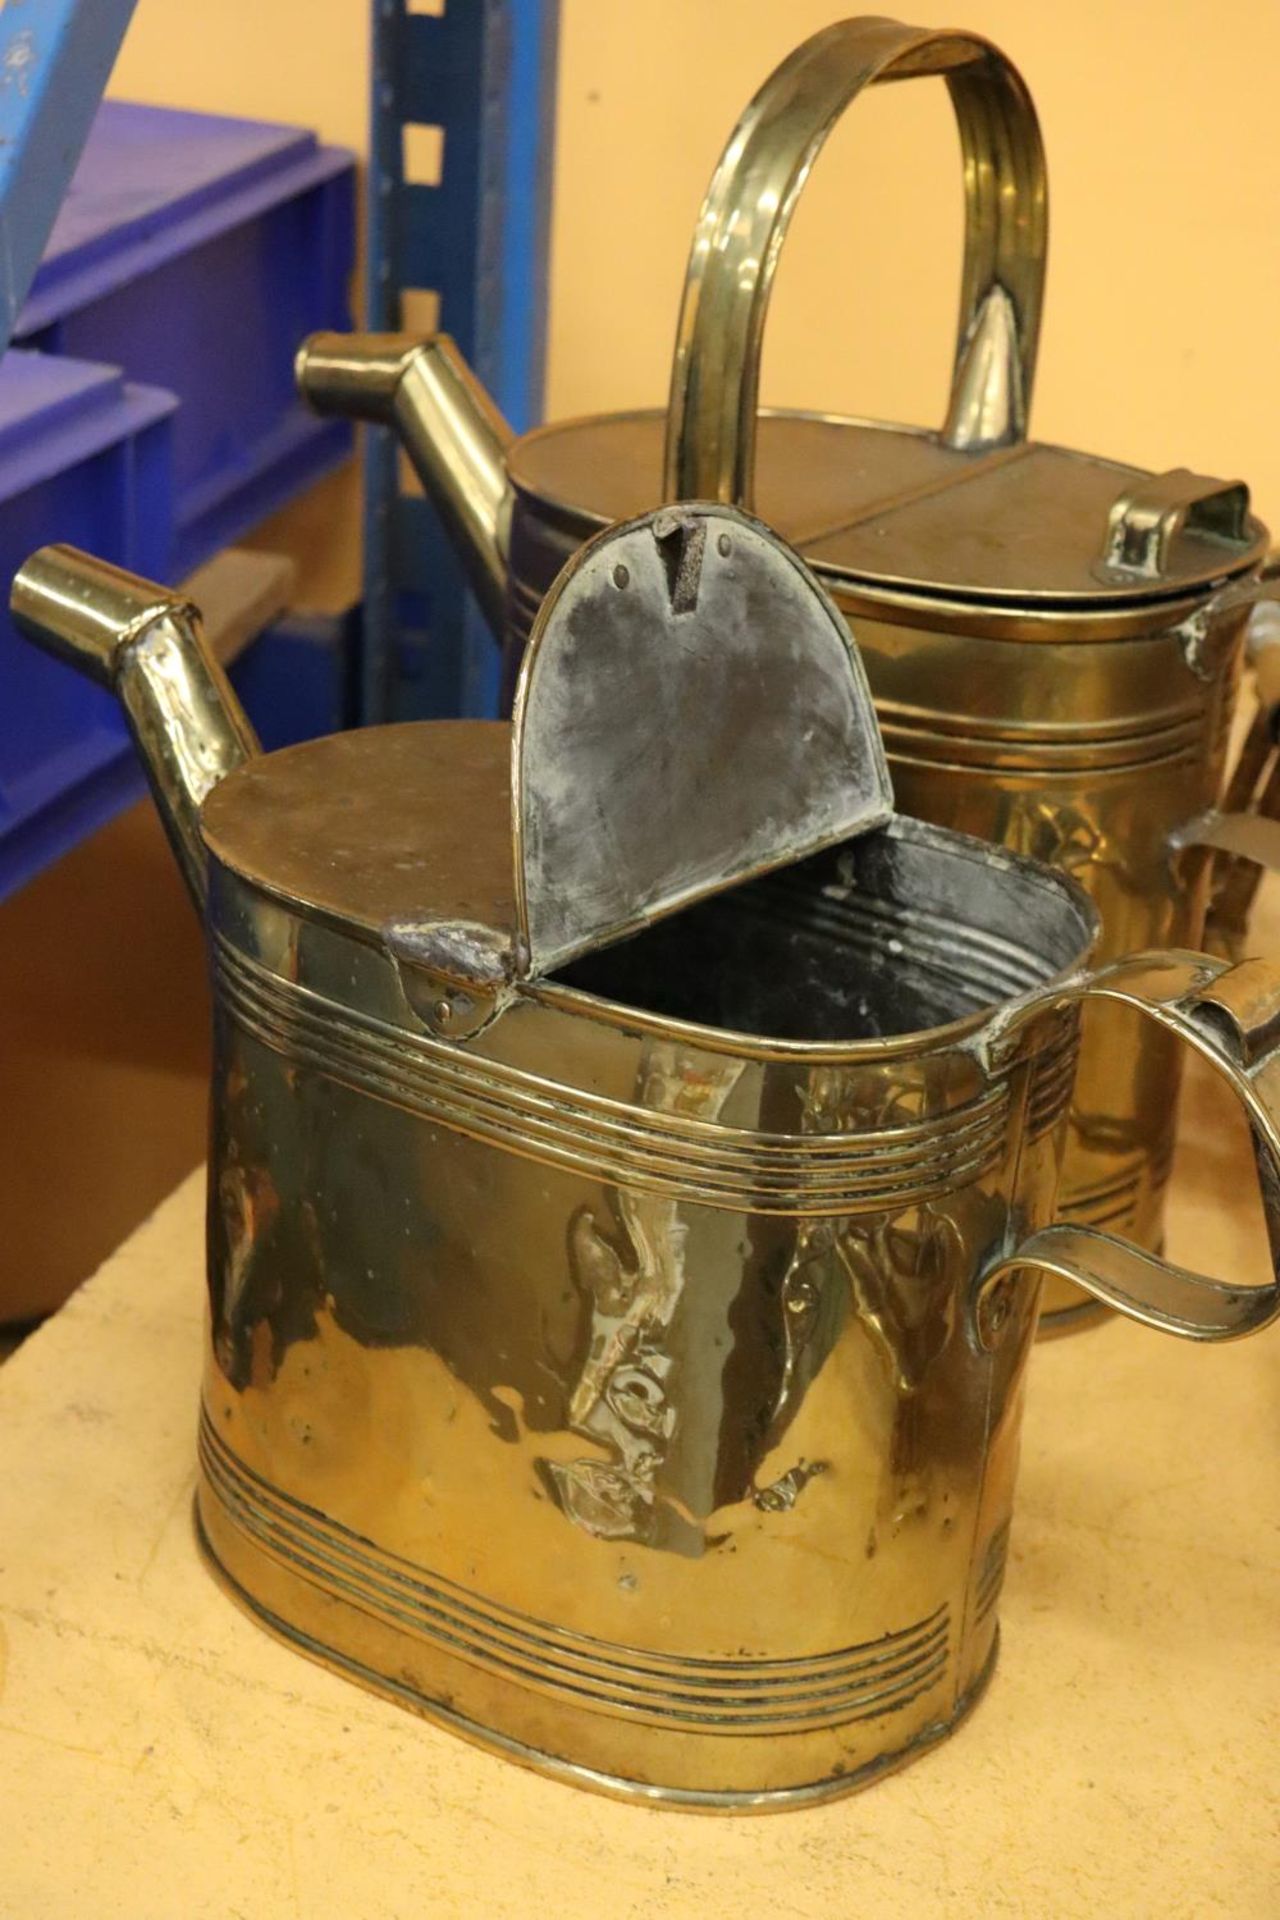 TWO BRASS WATERING CANS, ONE MISSING THE HANDLE - Image 5 of 5